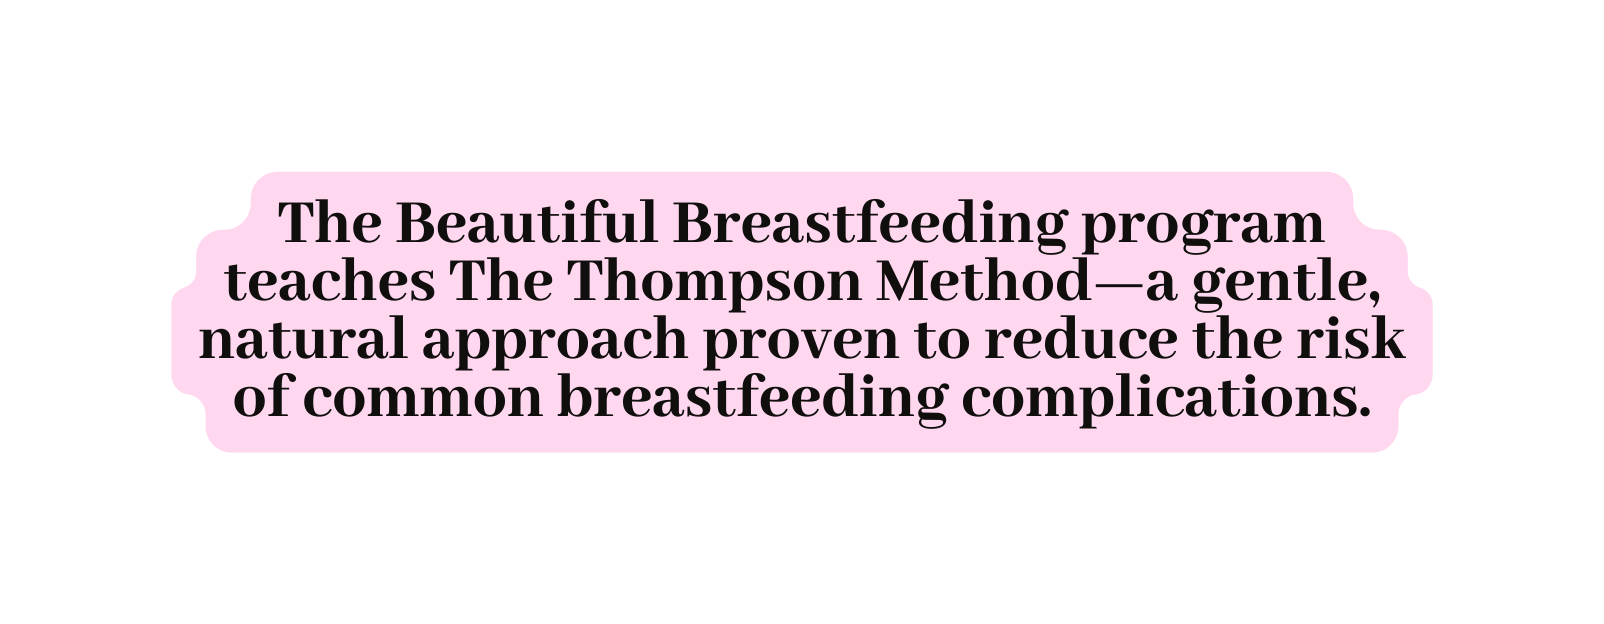 The Beautiful Breastfeeding program teaches The Thompson Method a gentle natural approach proven to reduce the risk of common breastfeeding complications